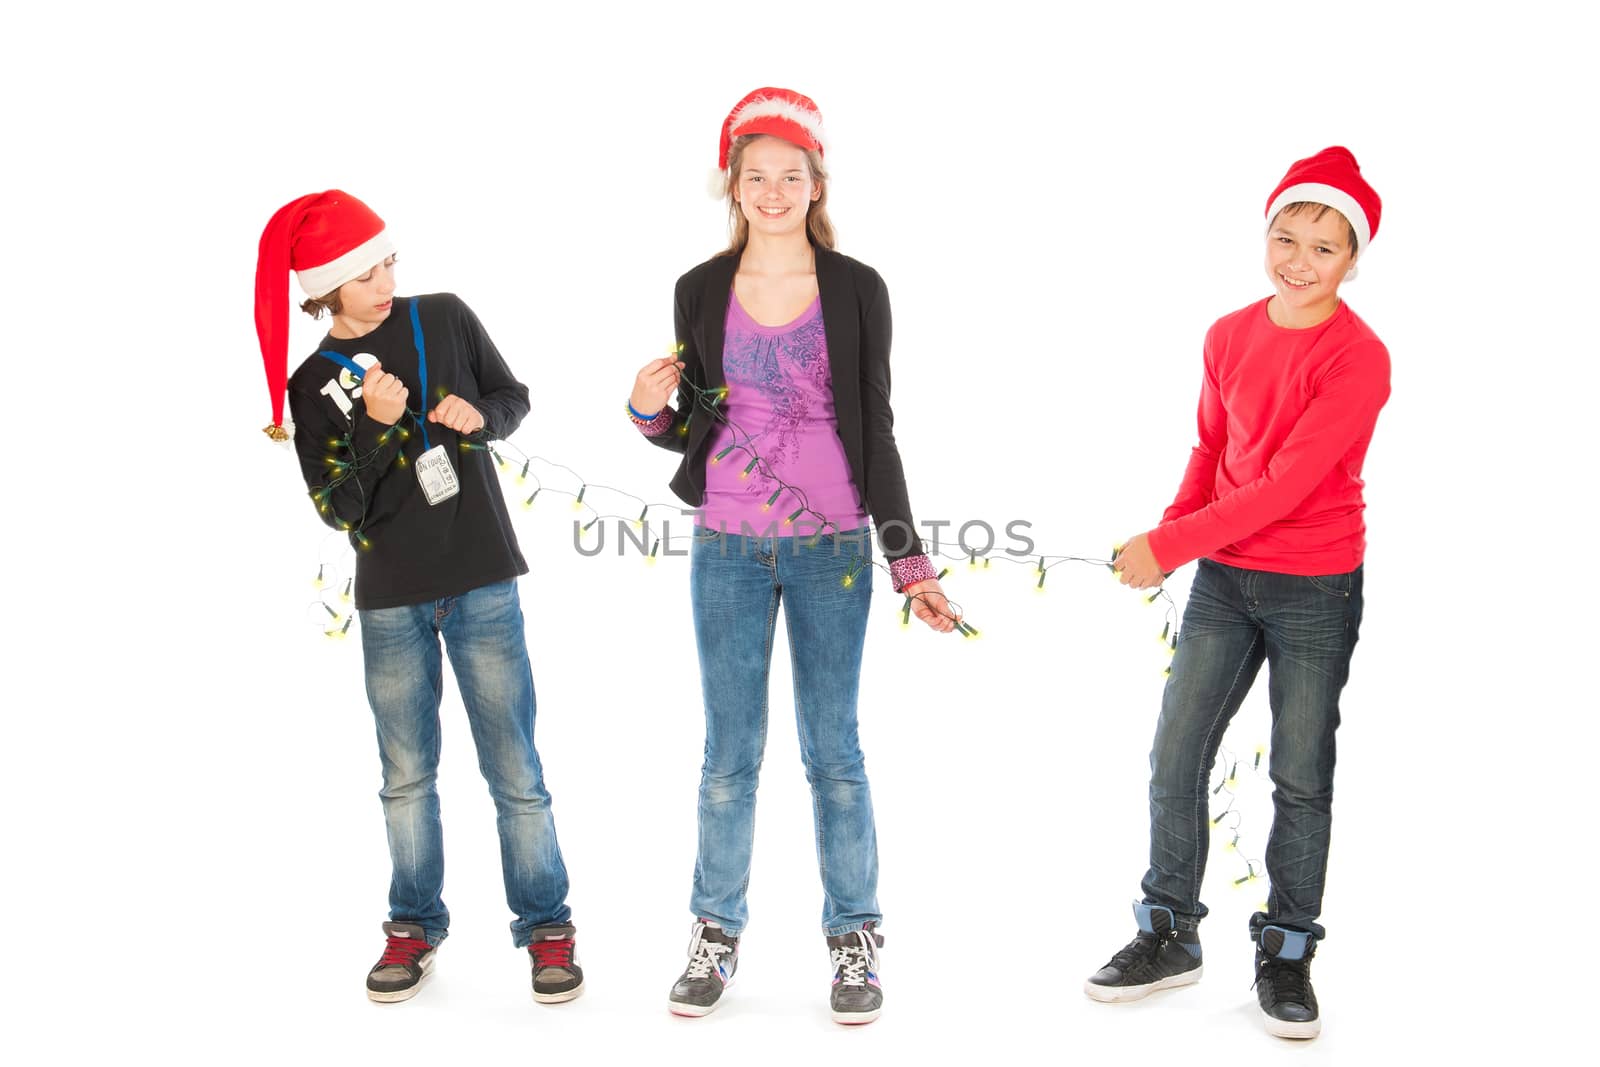 two boys decorating a girl for Christmas, on a white background